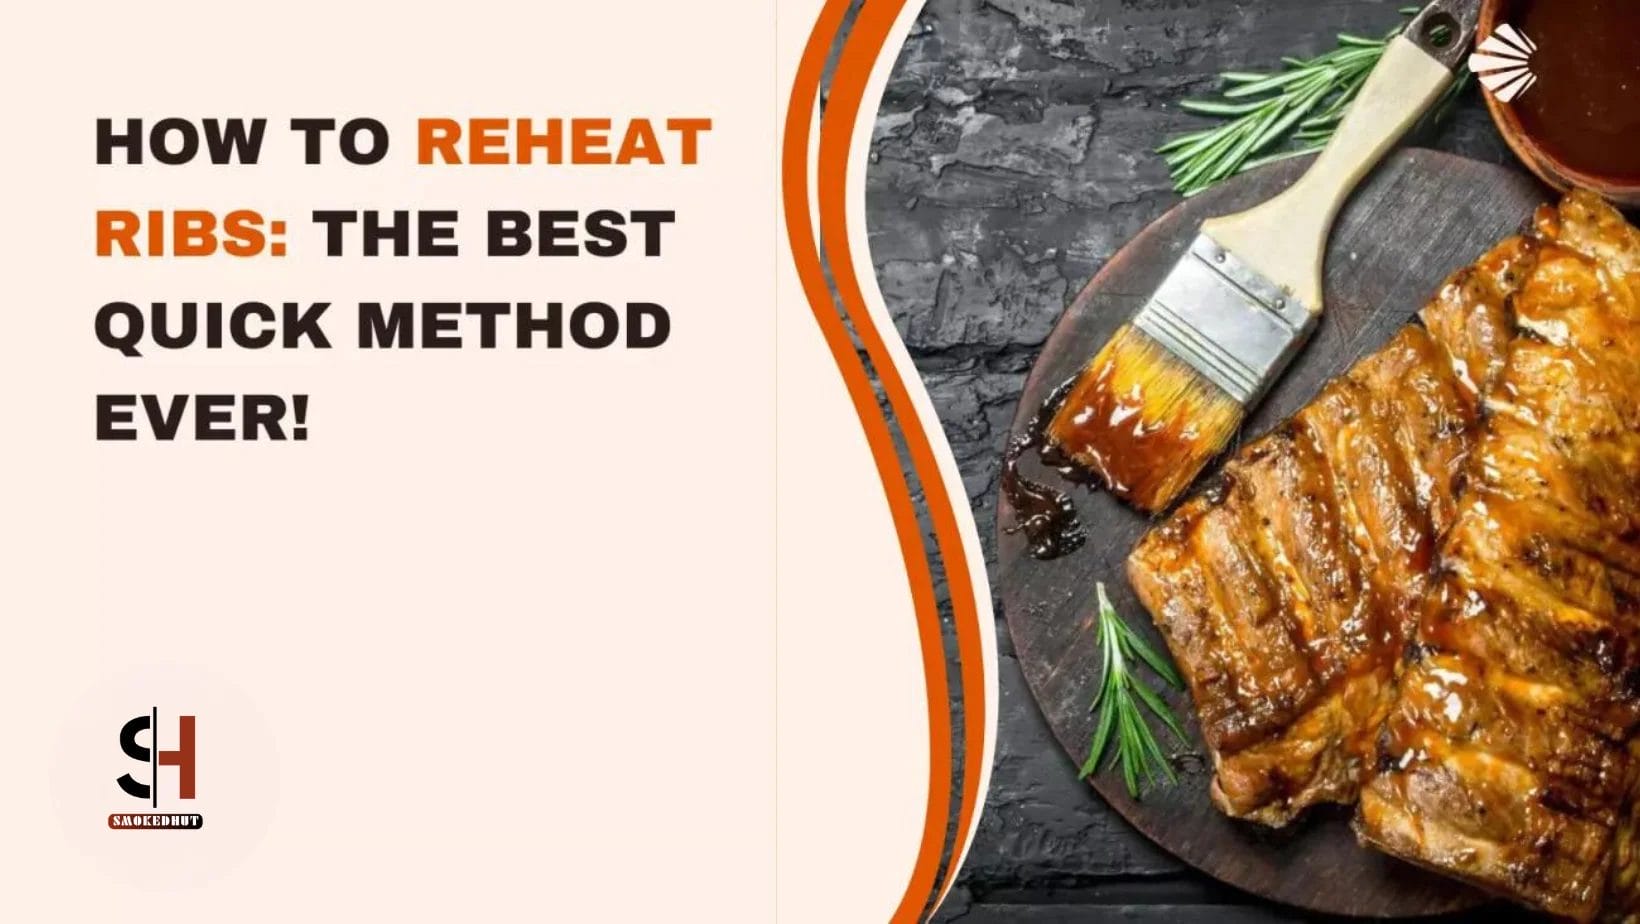 HOW TO REHEAT RIBS THE BEST QUICK METHOD EVER!